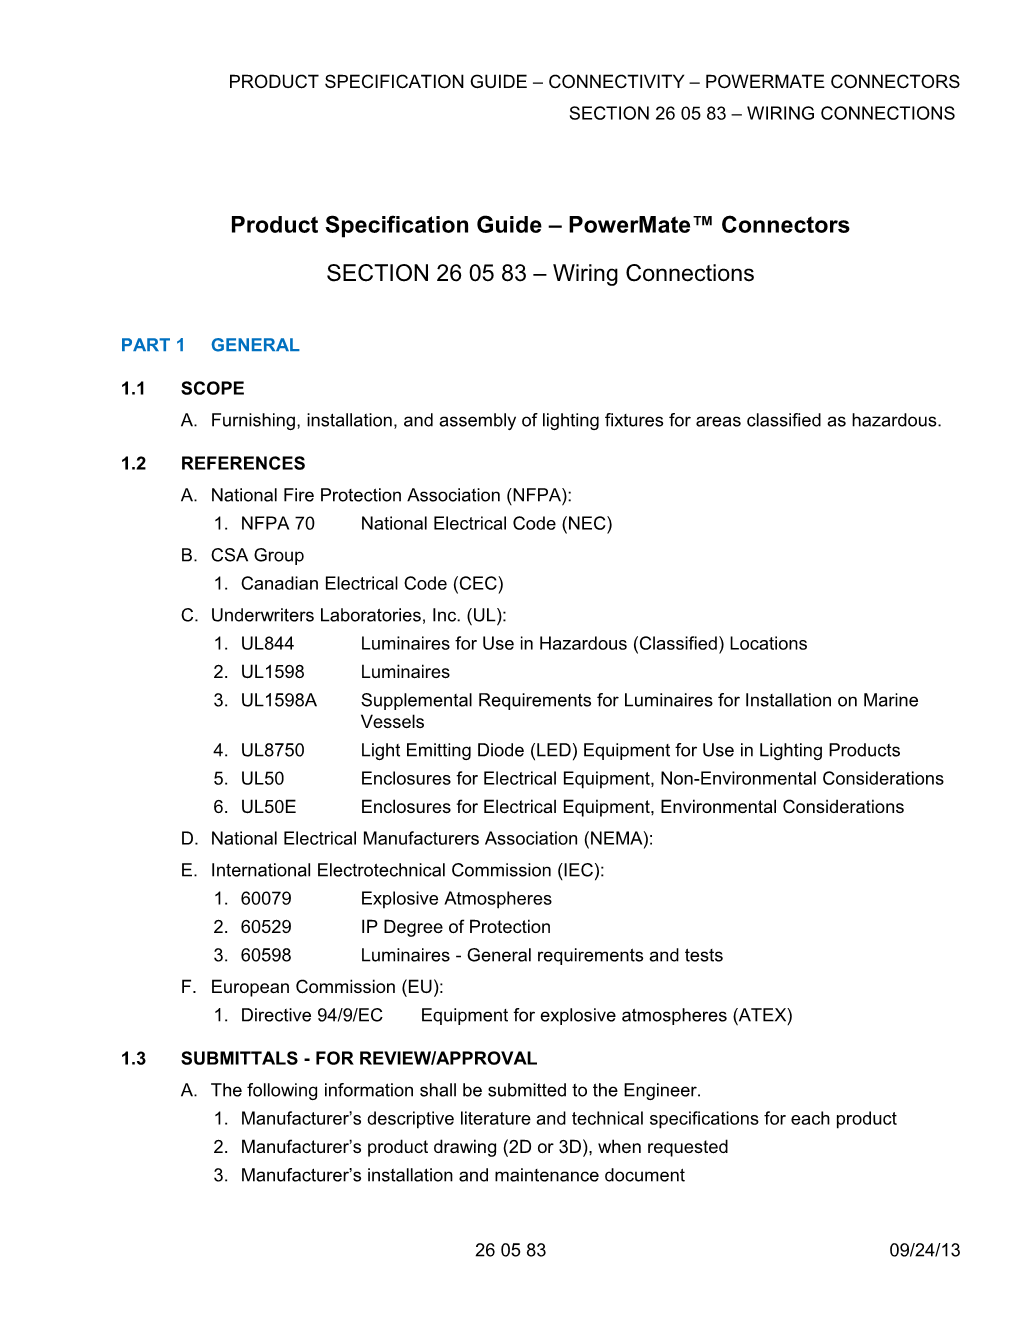 Product Specification Guide Powermate Connectors